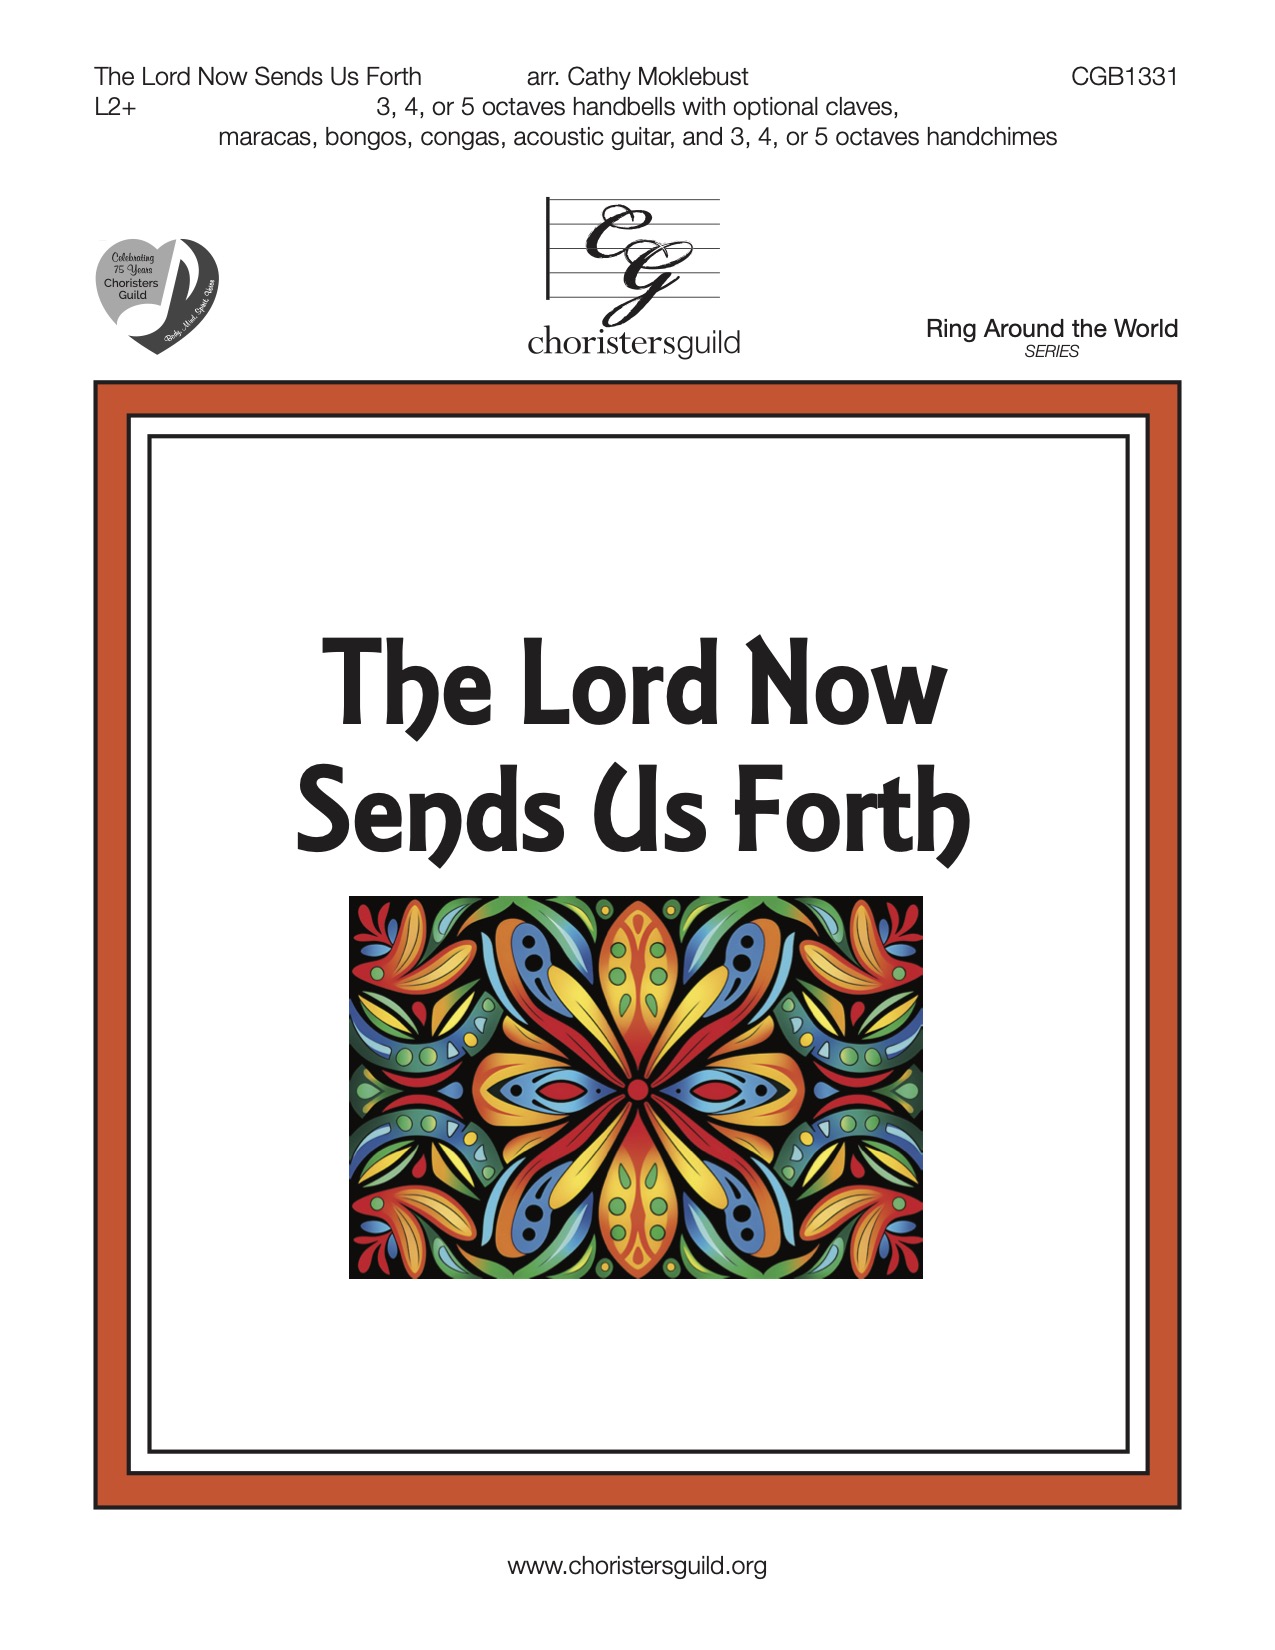 The Lord Now Sends Us Forth (3-5 octaves)